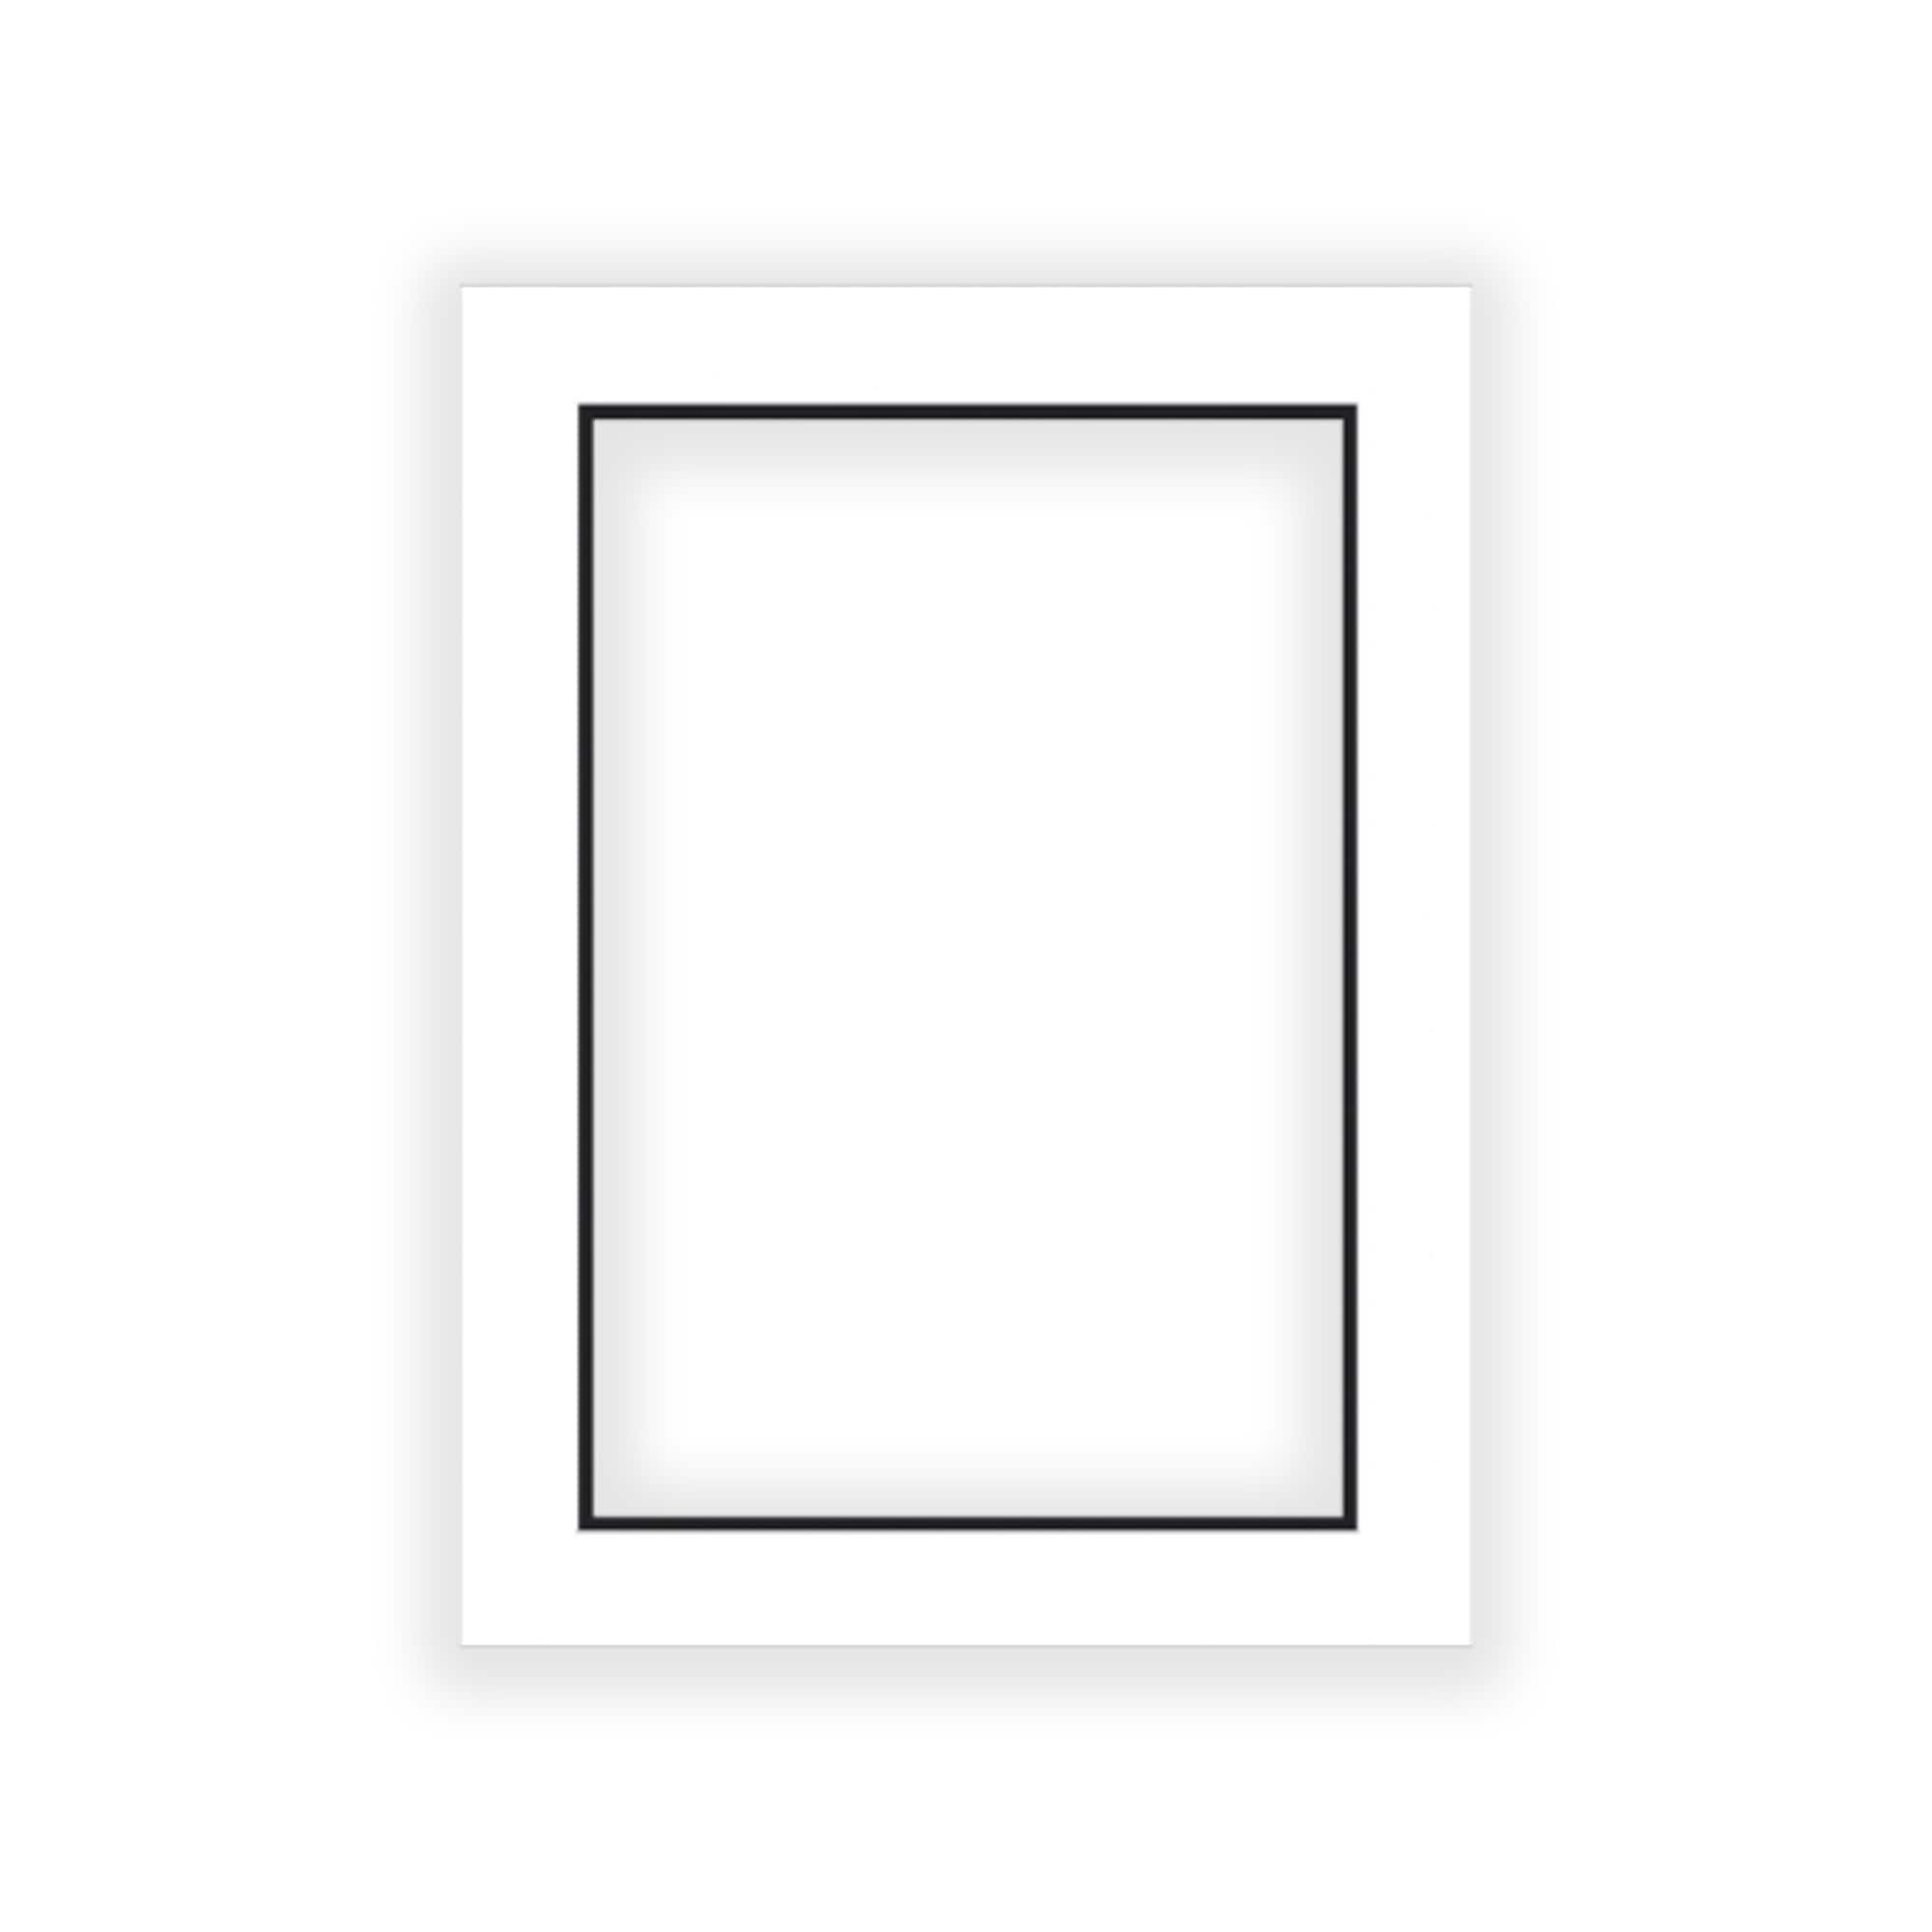 8x10 Mat for 6x8 Photo - White on Black Double Mat Matboard for Frames Measuring 8 x 10 in - to Display Art Measuring 6 x 8 in